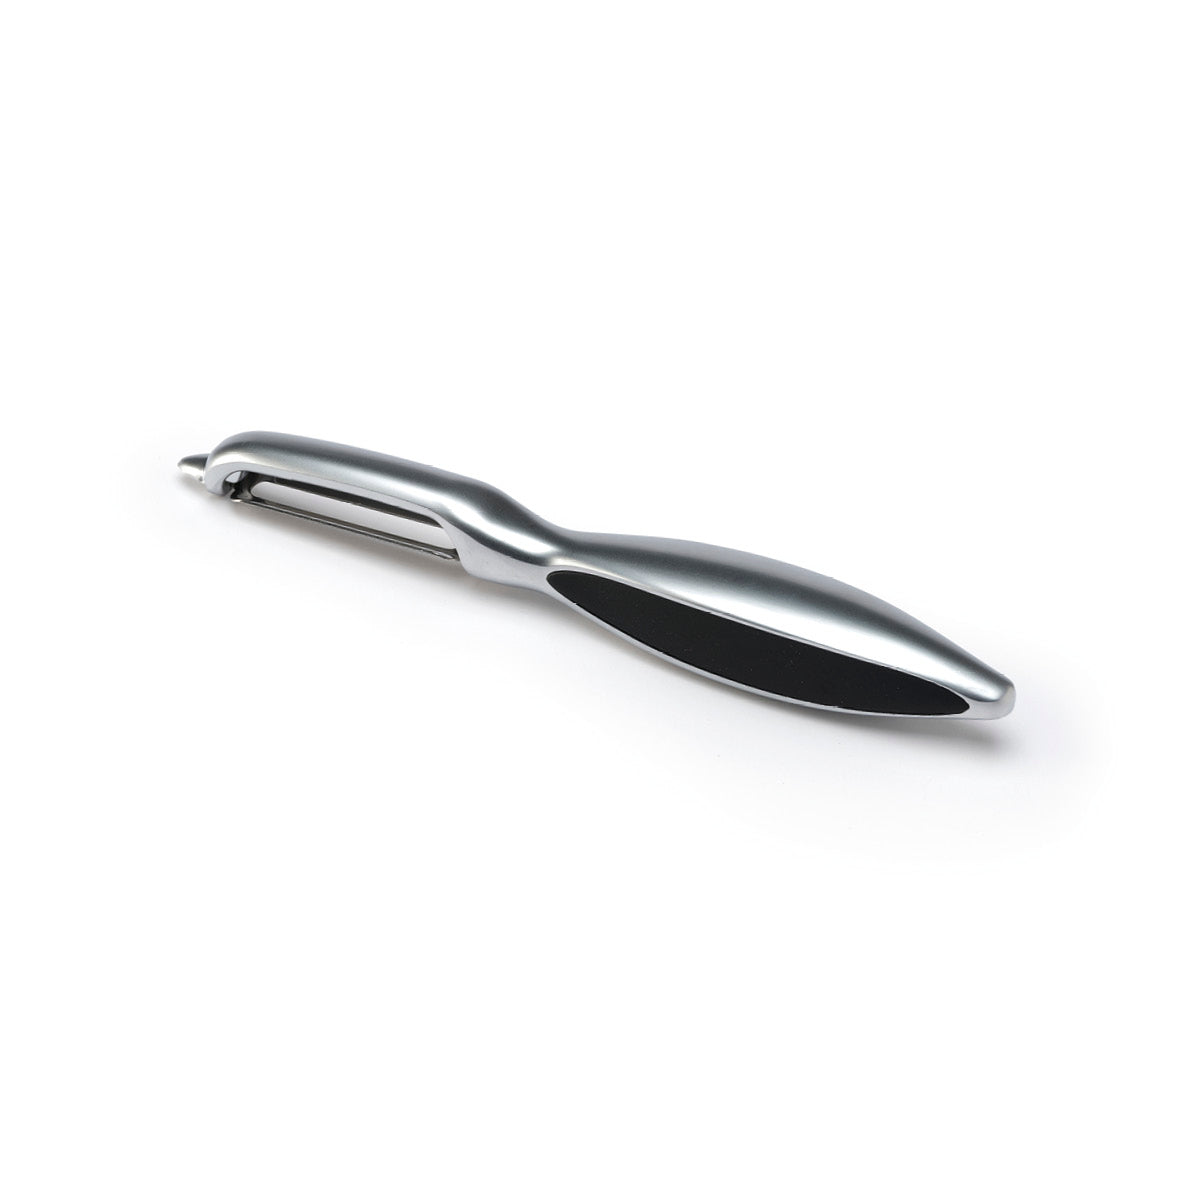 P-peeler with soft touch in stainless steel - grey/black